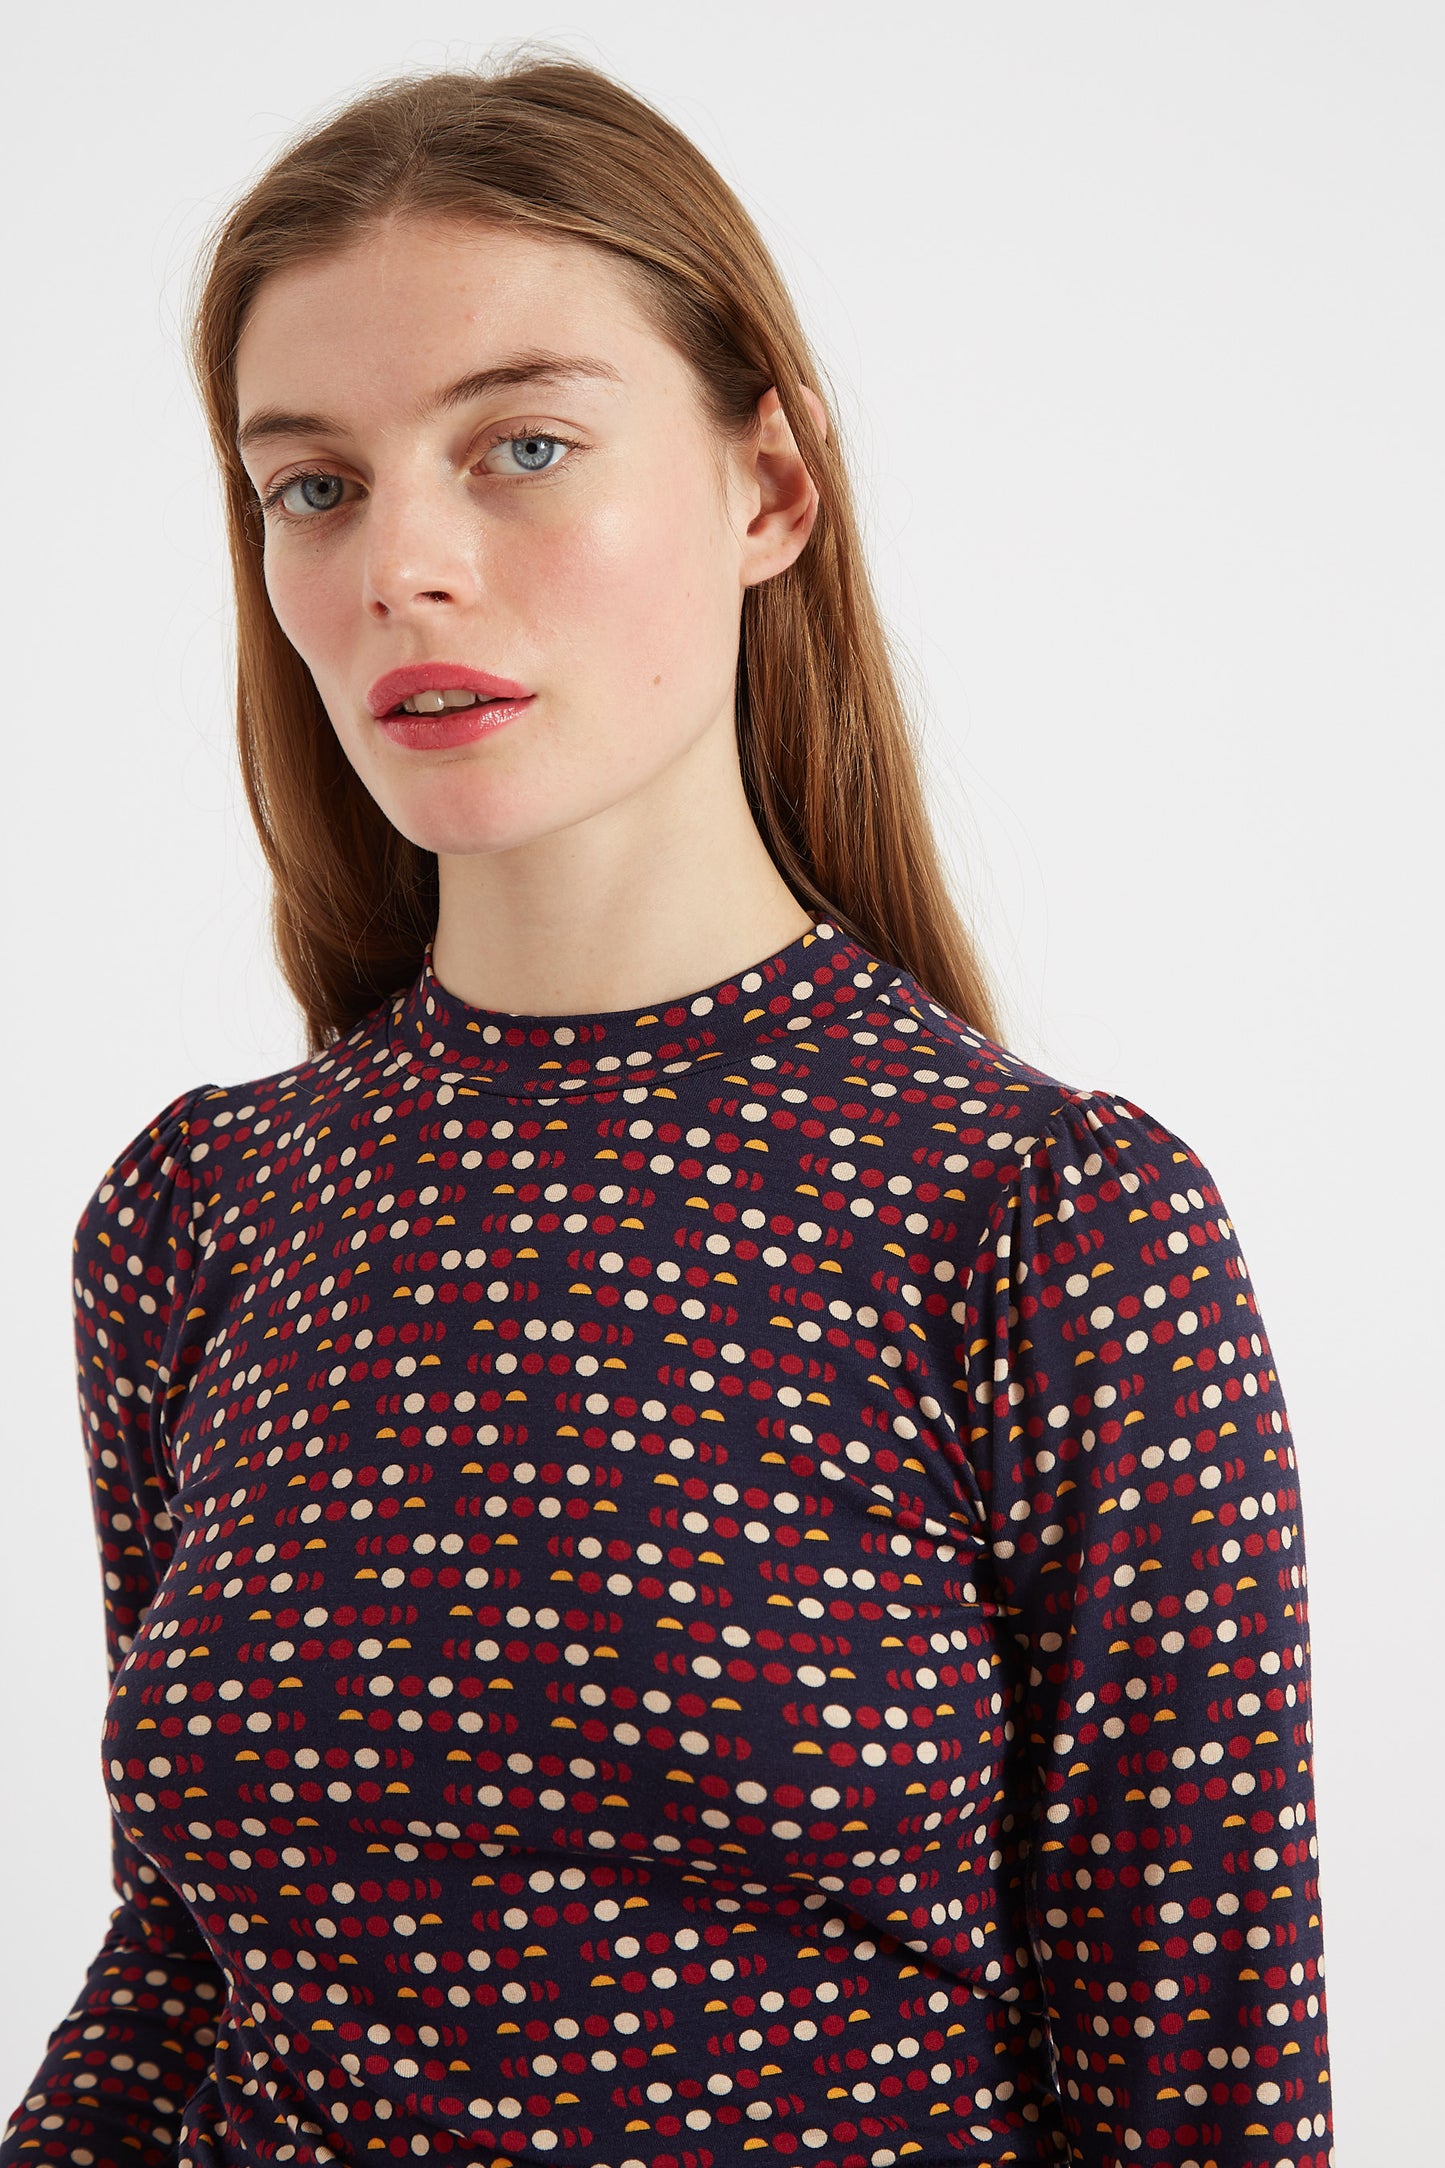 Gilly Retro Dots Print Long Sleeve Top